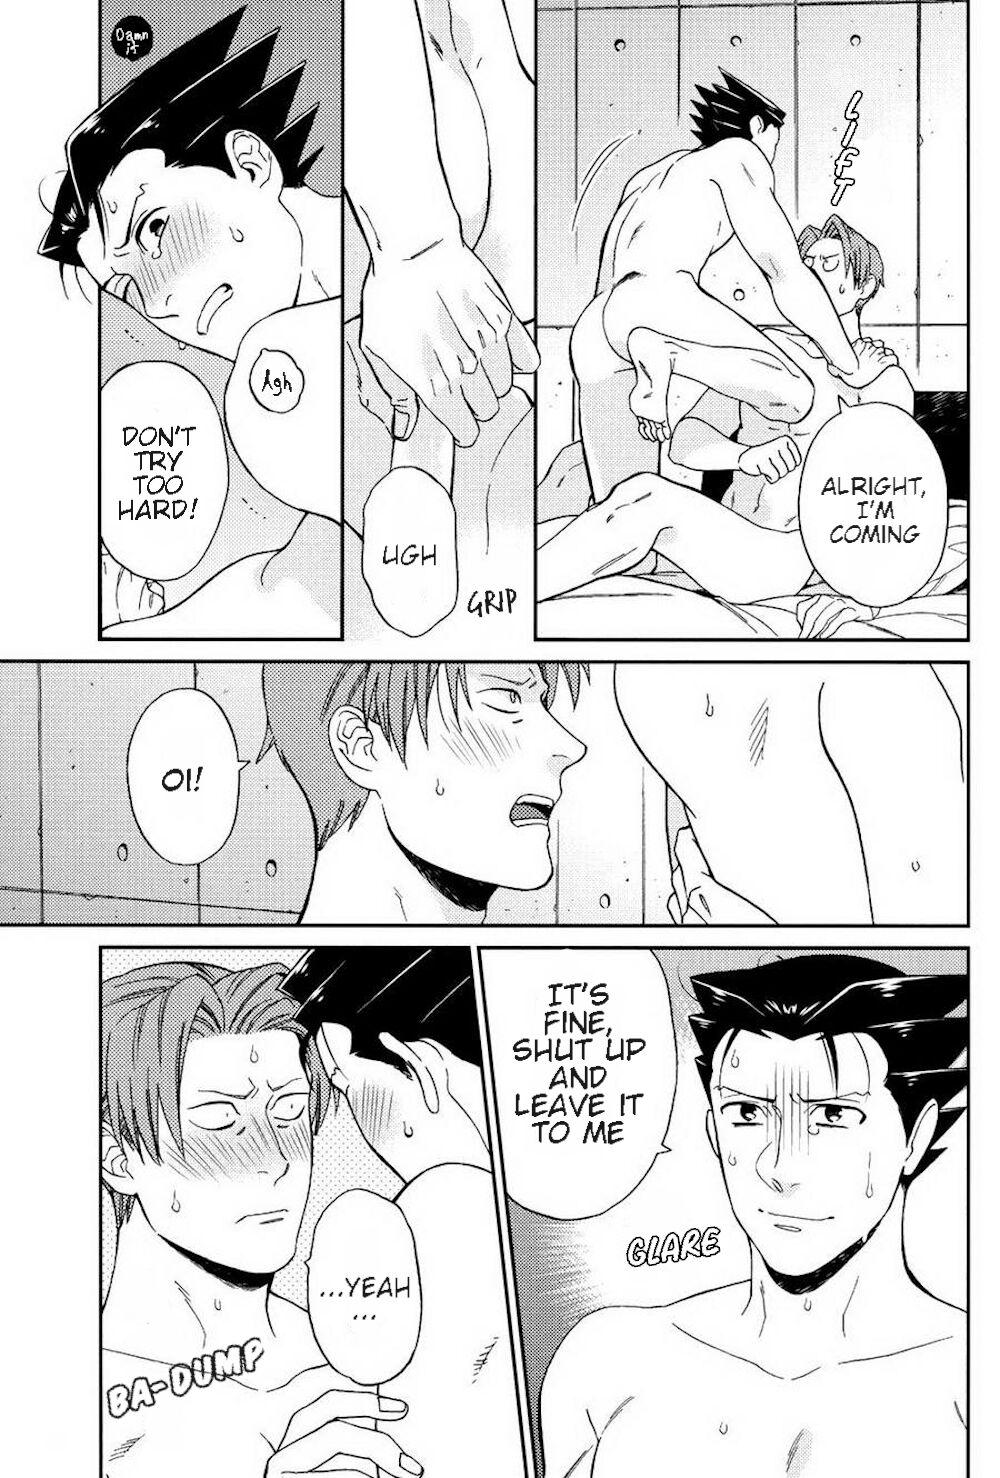 Soles Kid who can do it if he tries, kid who can't - Ace attorney | gyakuten saiban Femdom Porn - Page 10